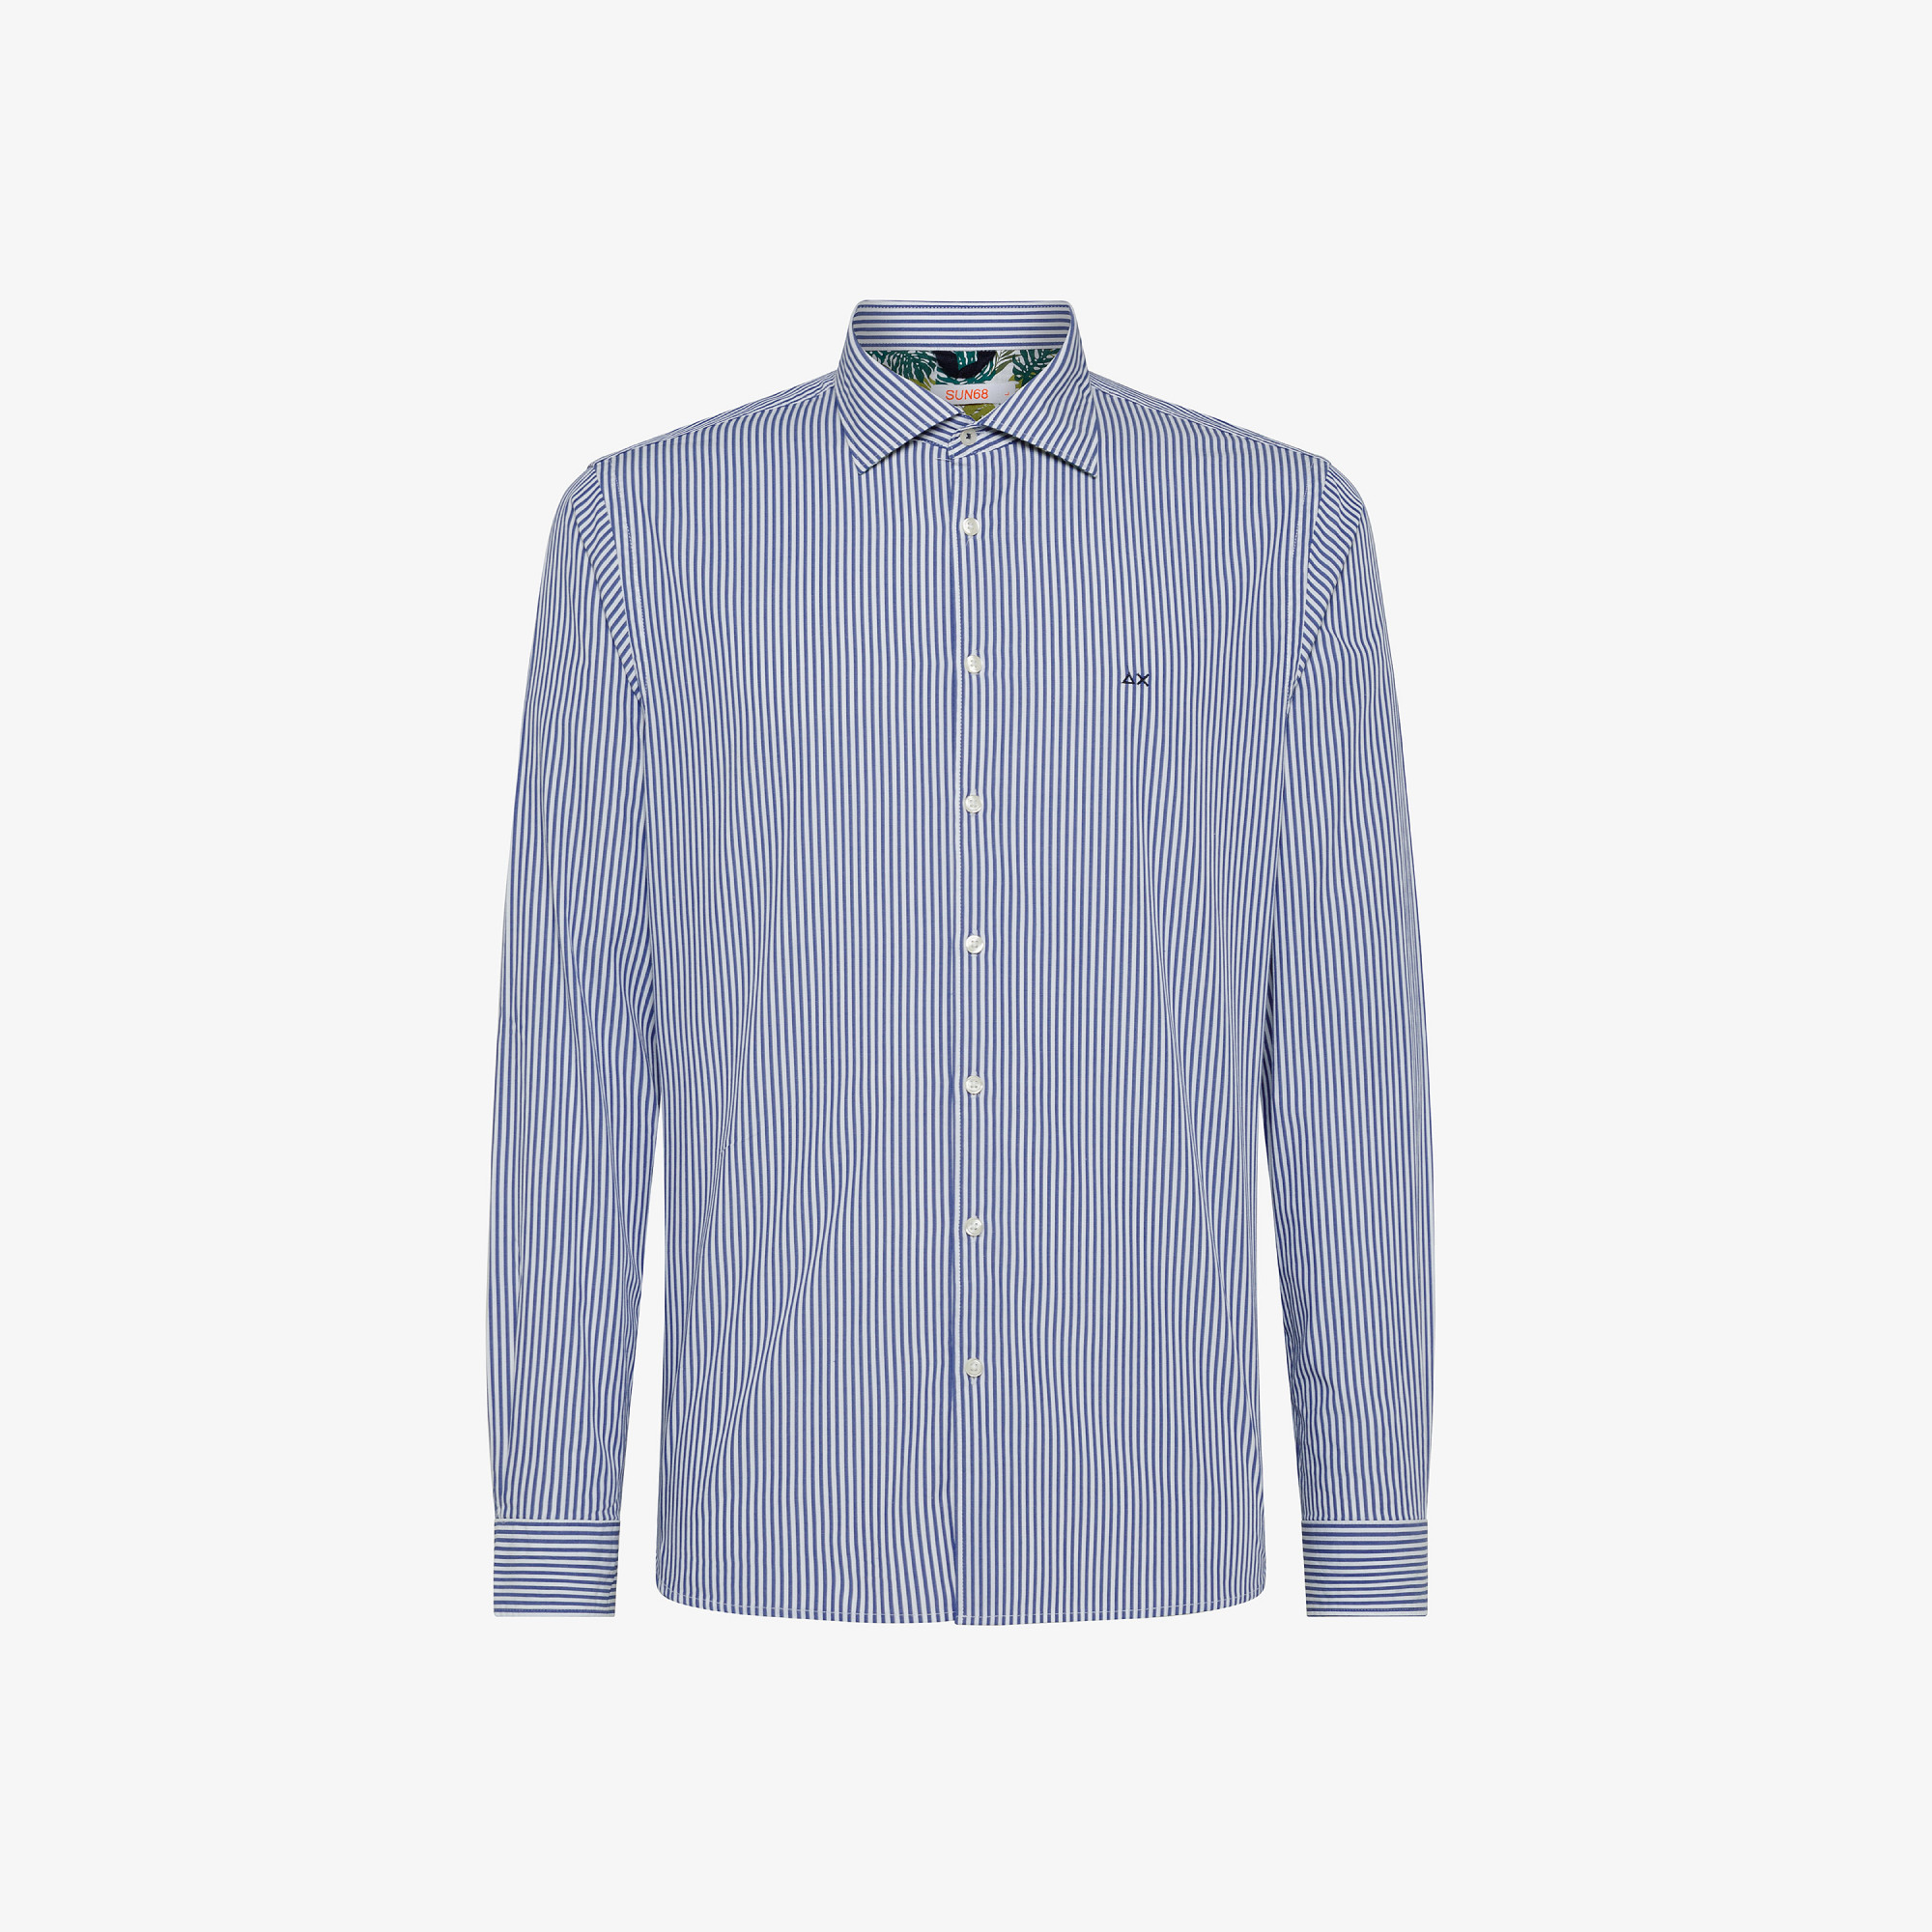 SHIRT FANCY WITH DETAIL NAVY BLUE